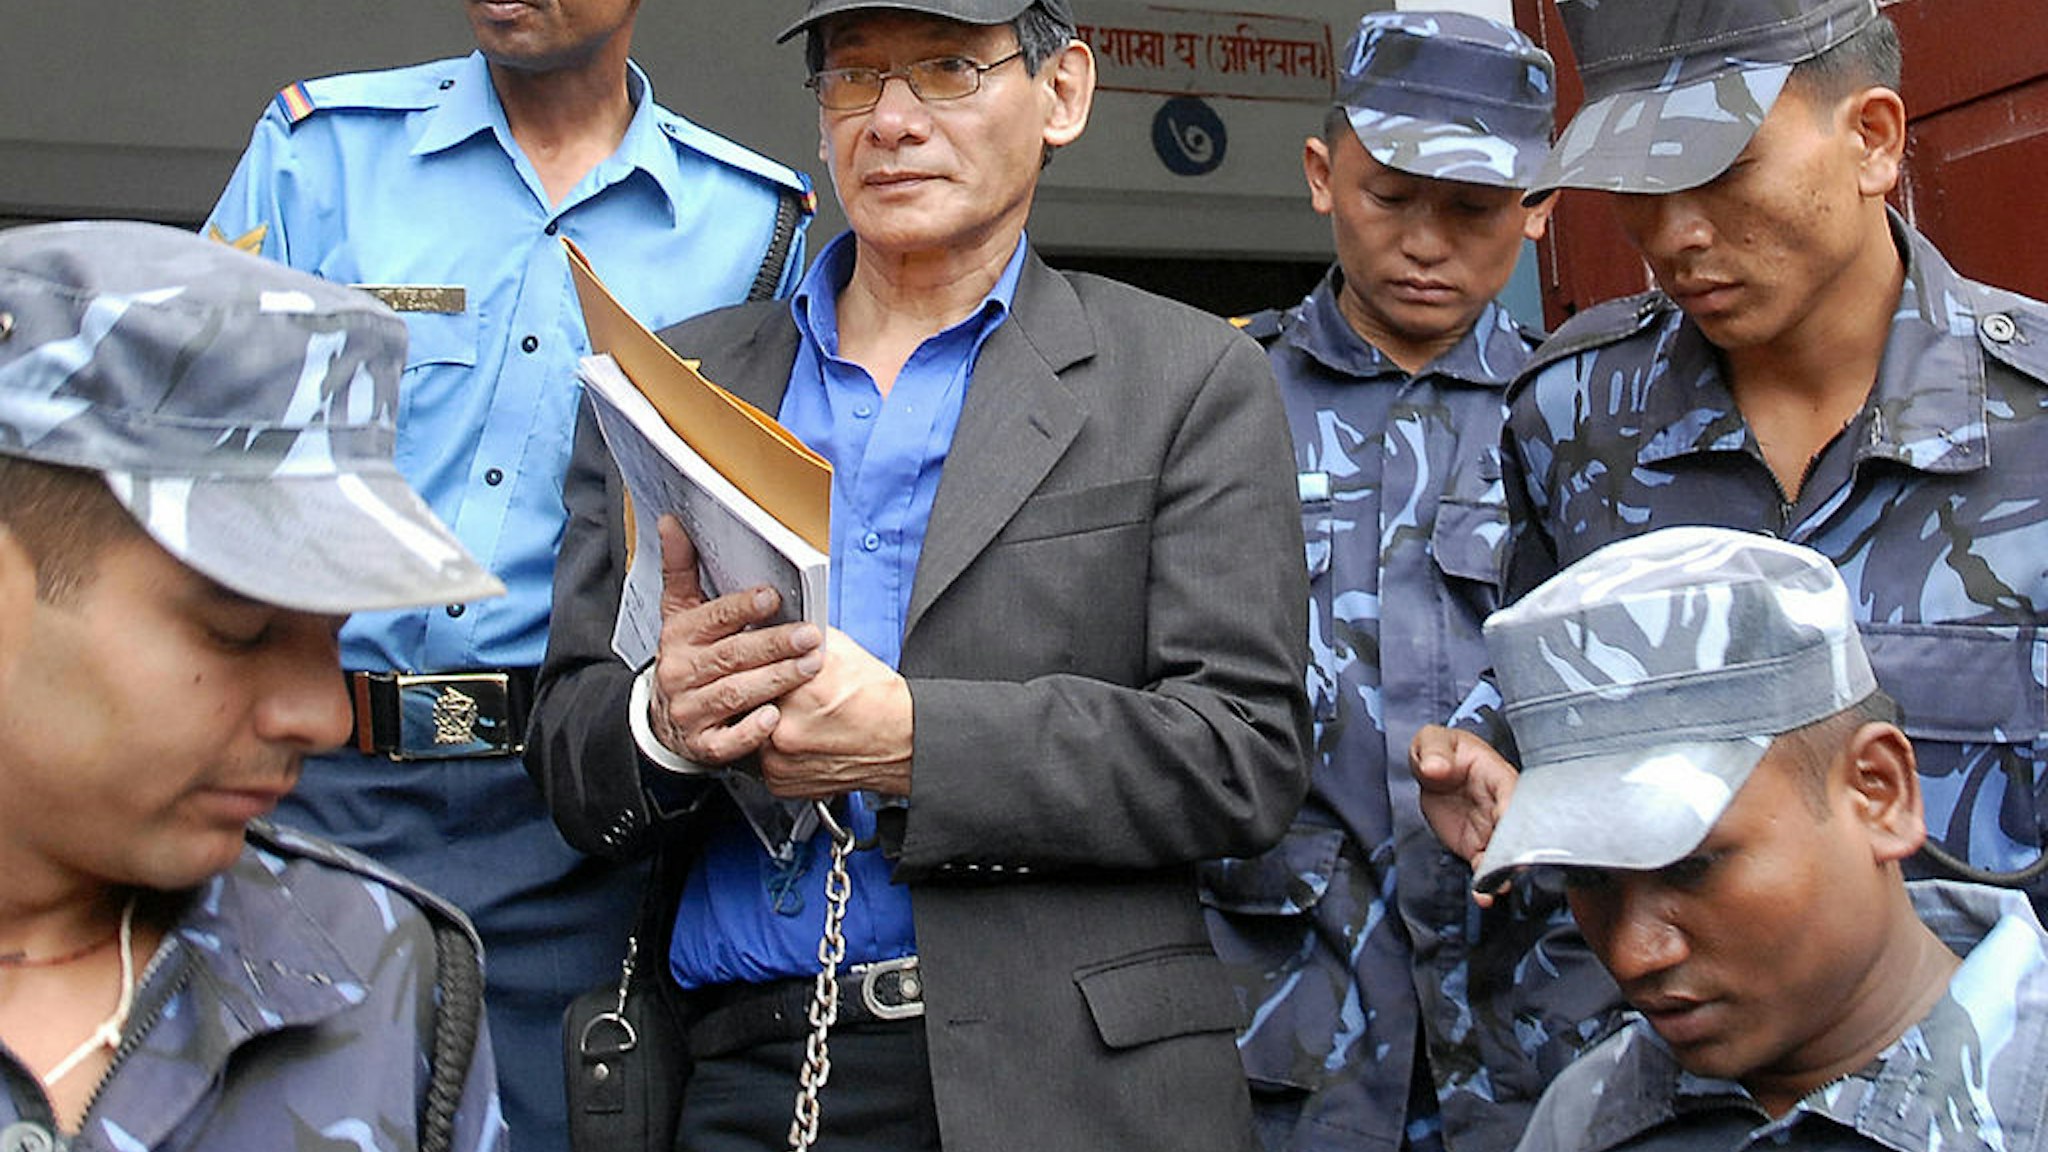 French serial killer Charles Sobhraj (C) is guided by Nepalese policemen towards a waiting vehicle after a court ruling in Kathmandu on August 18, 2008.